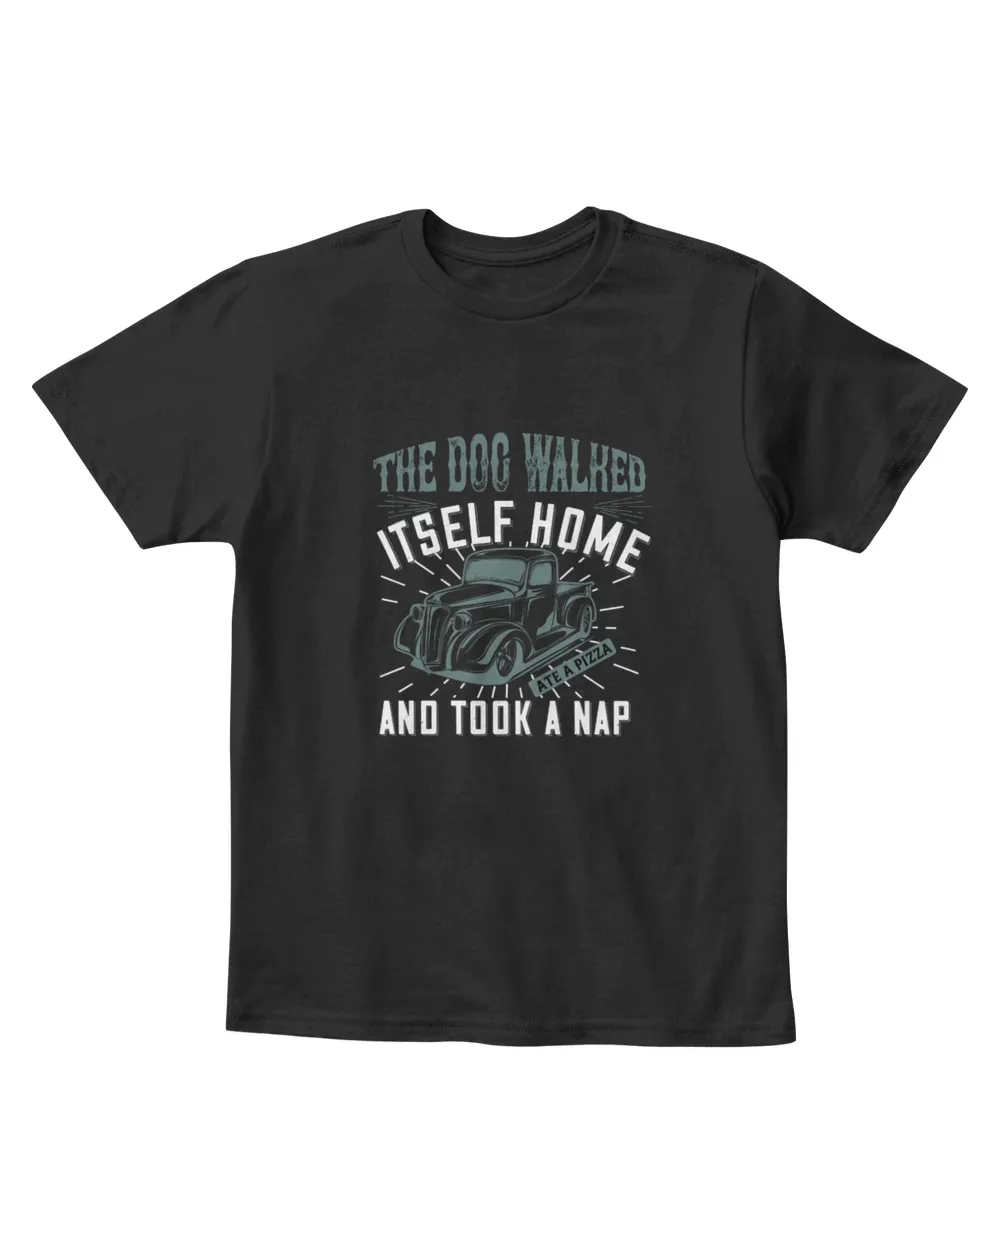 The Dog Walked Itself Home Ate A Pizza And Took A Nap Hot Rod T-Shirt